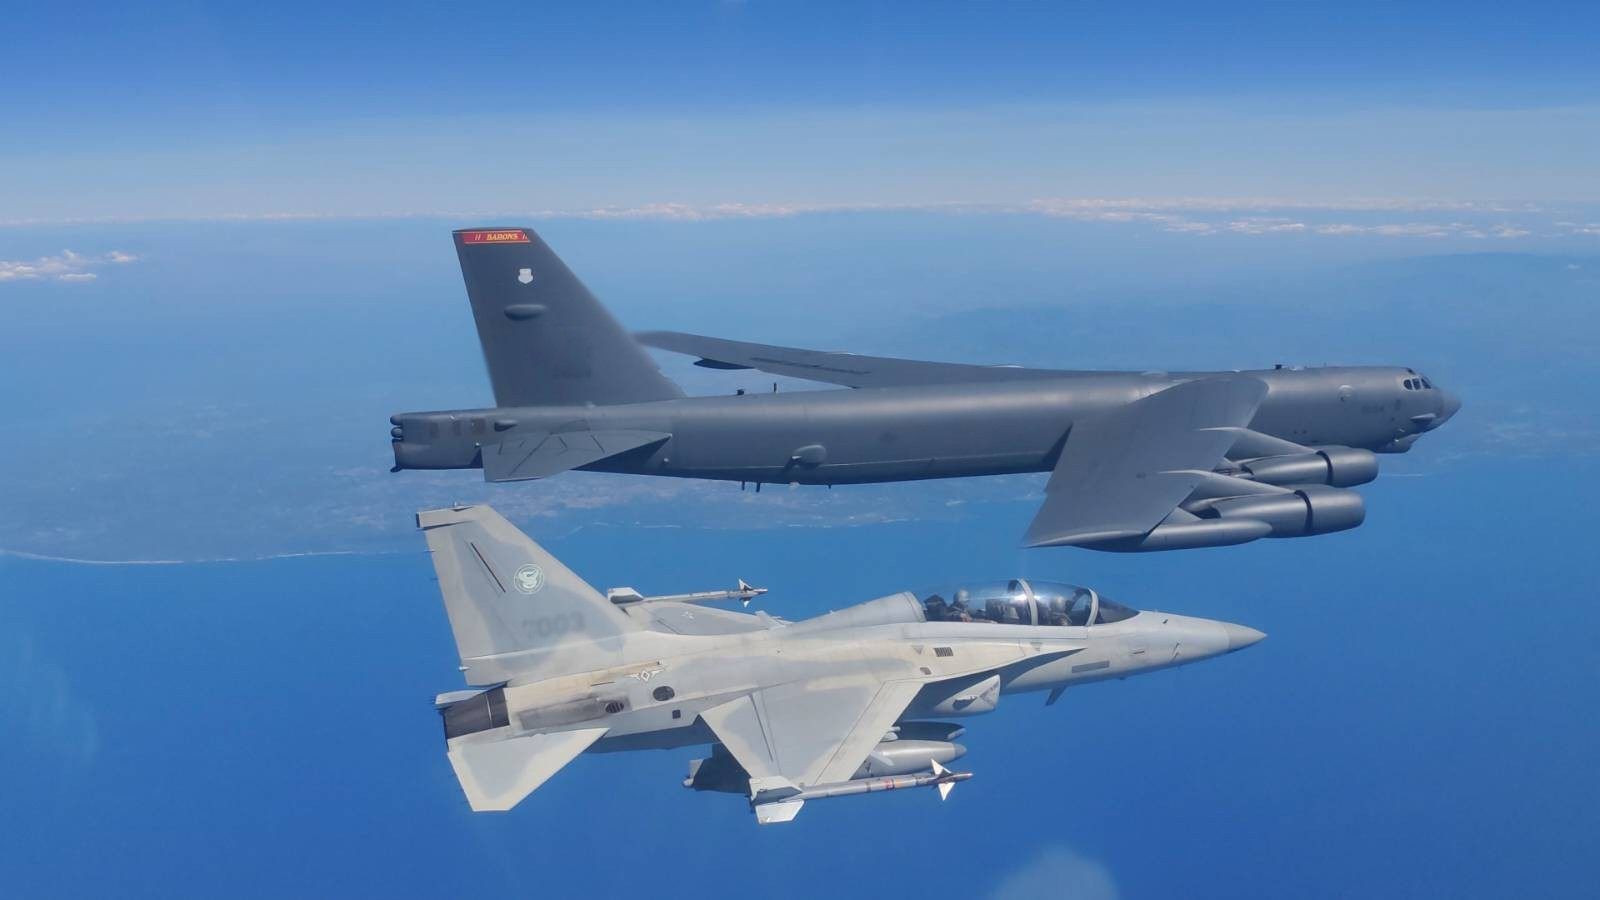 This week’s US-Philippine joint patrols over the South China Sea include a B-52H bomber and FA-50 combat aircraft, according to the Philippine Air Force. Photo: Twitter/ Philippine Air Force